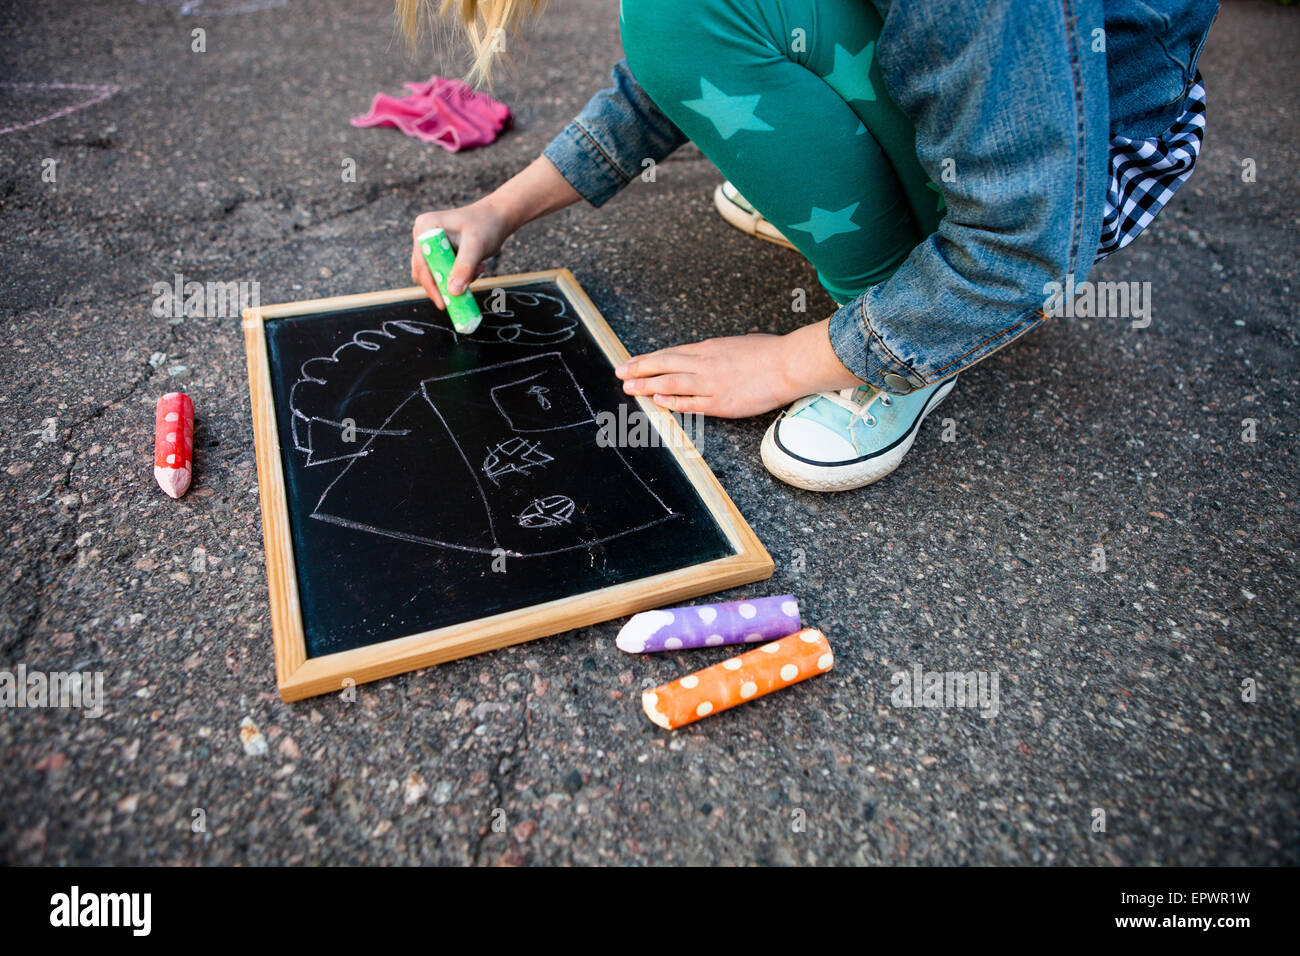 Girl drawing a house on chalkboard outdoors on asphalt with colorful street chalk Stock Photo